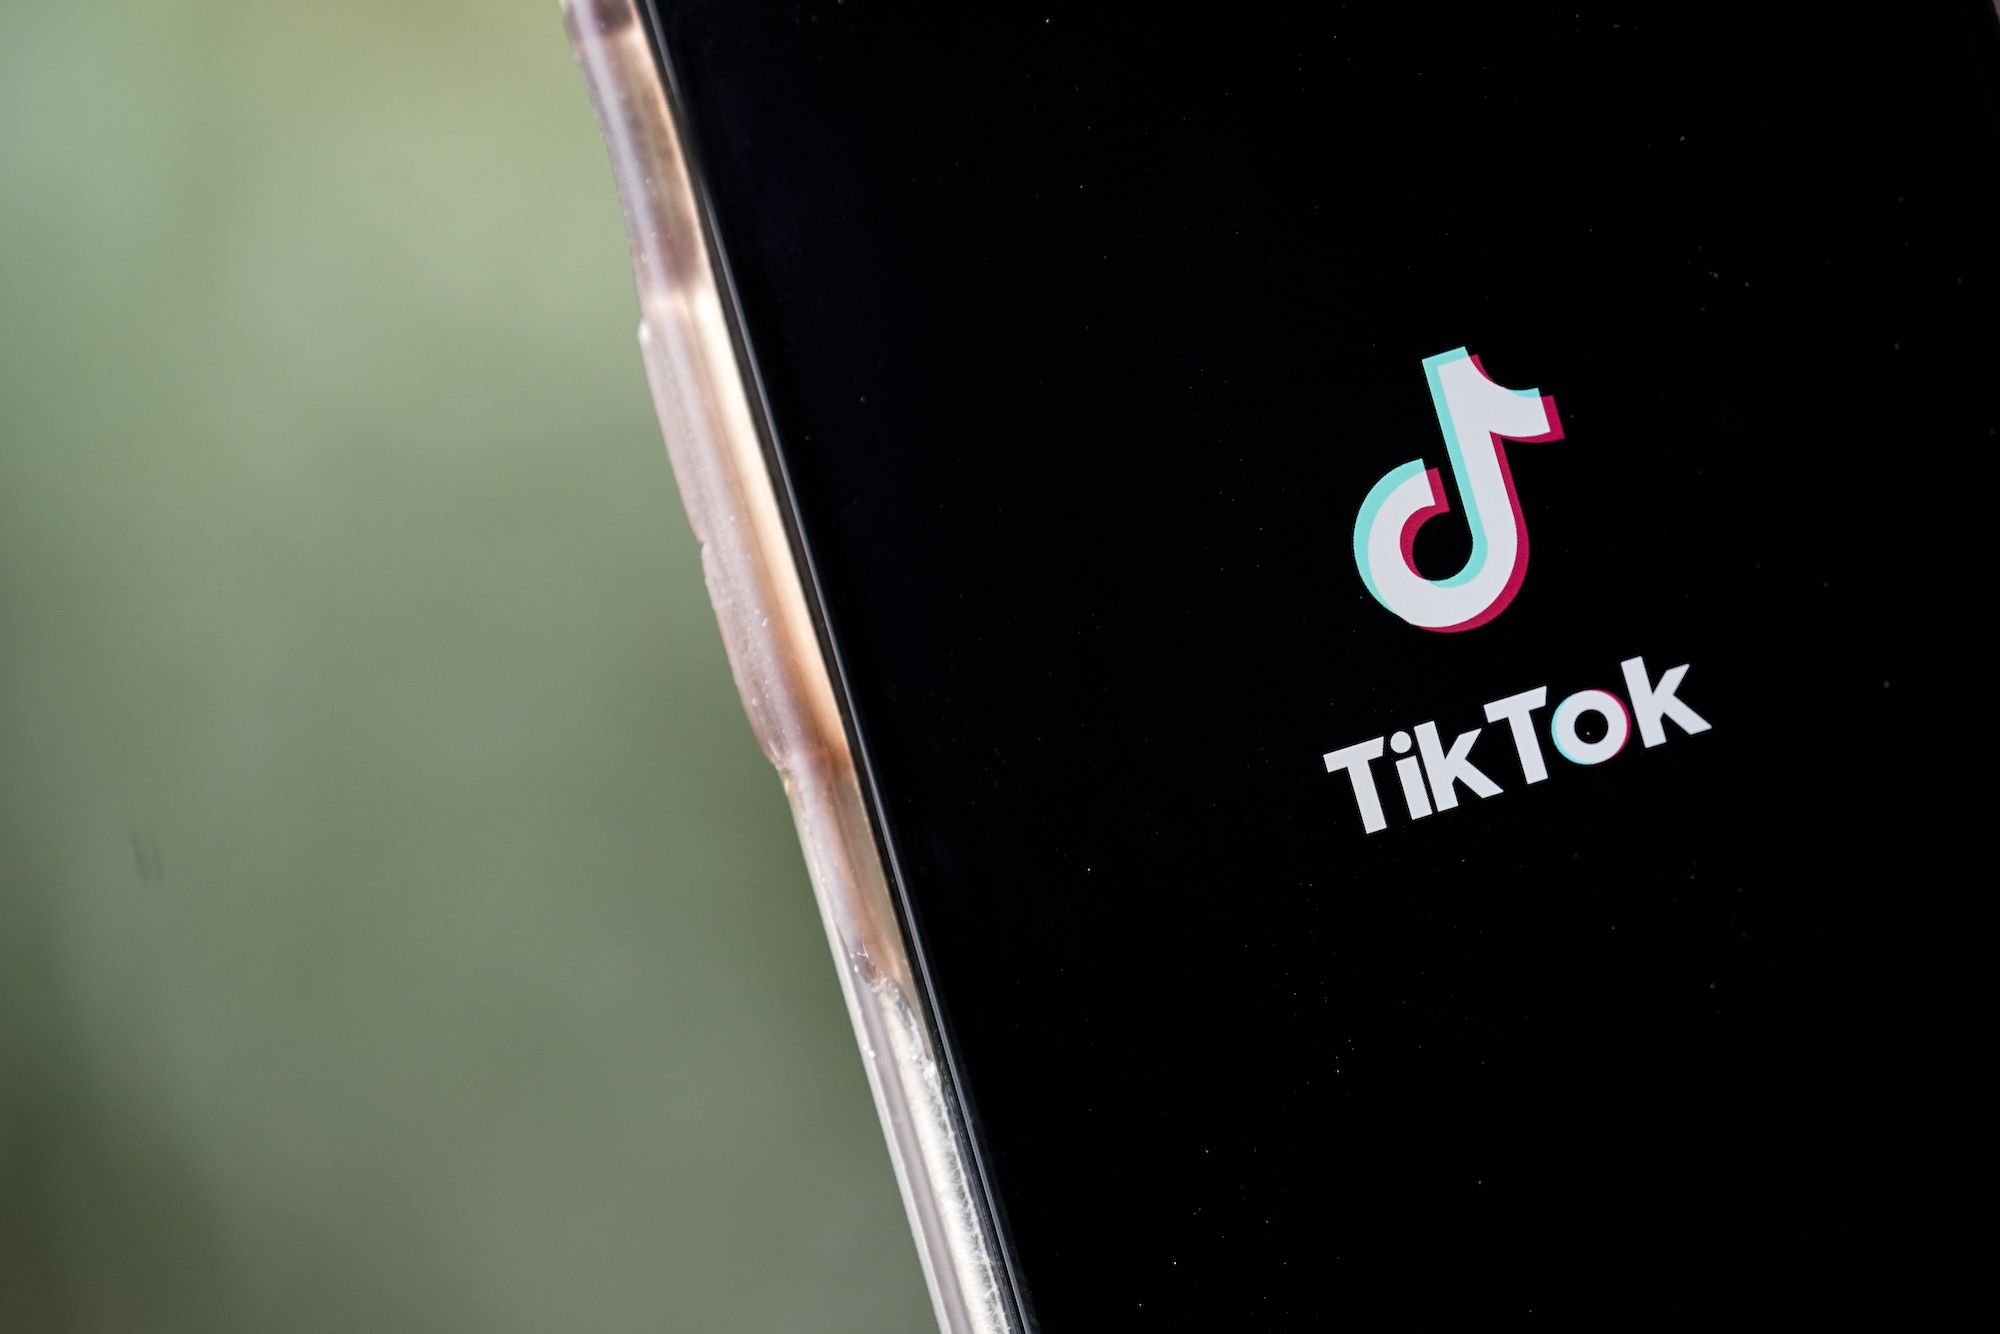 Biden signs TikTok ban for government devices amid security concerns